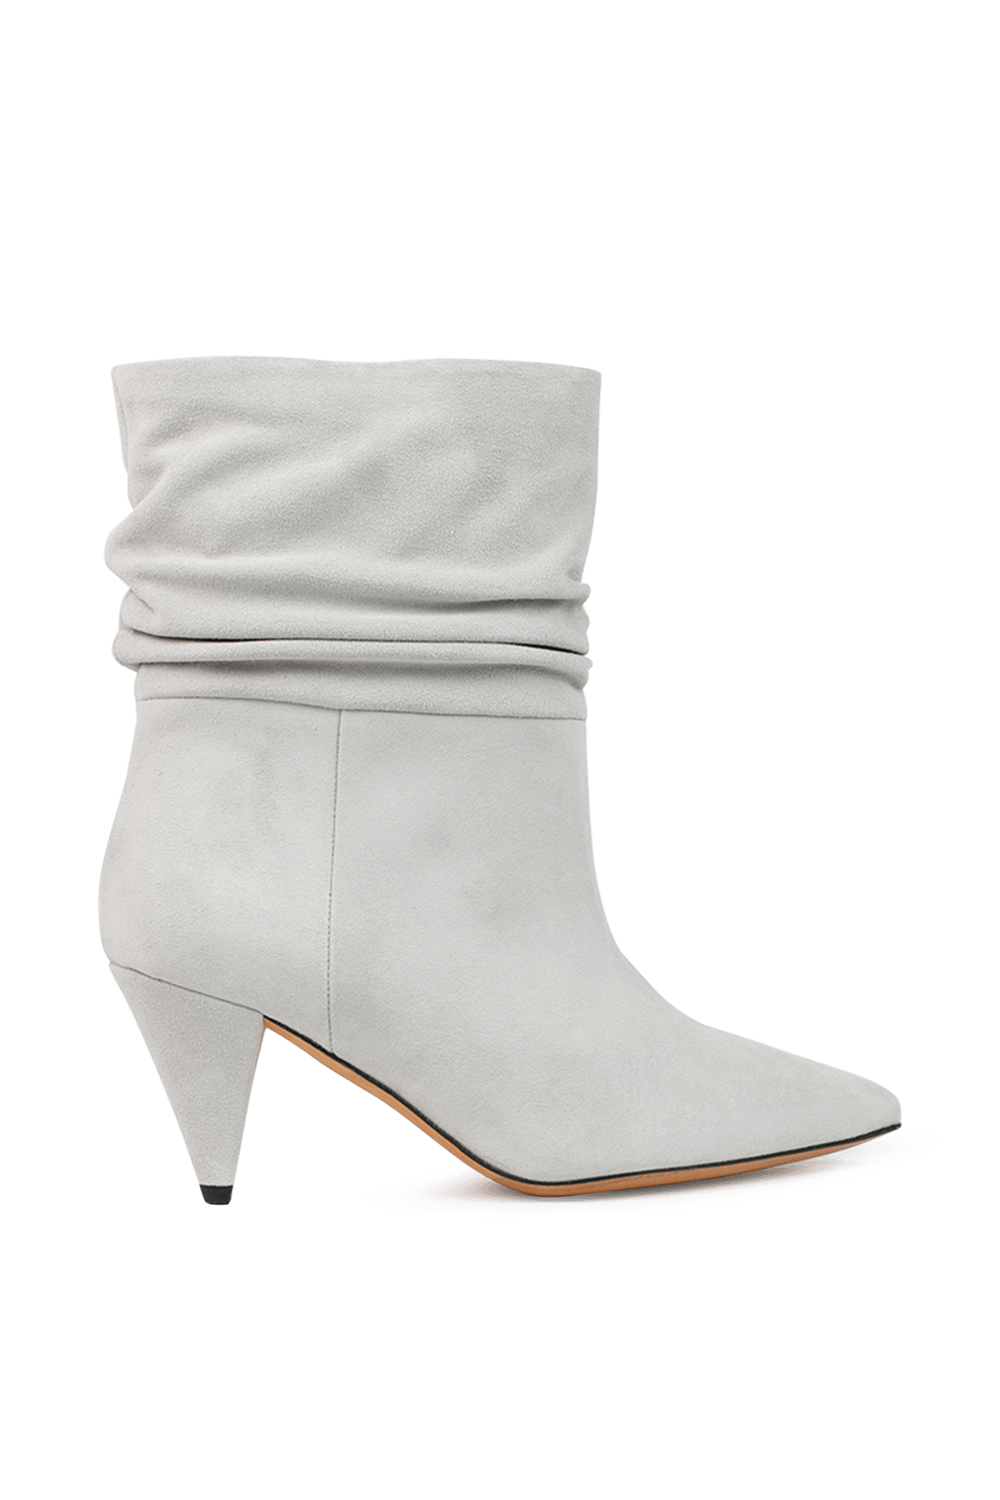 Theke Suede Ankle Boots in Whitea IRO